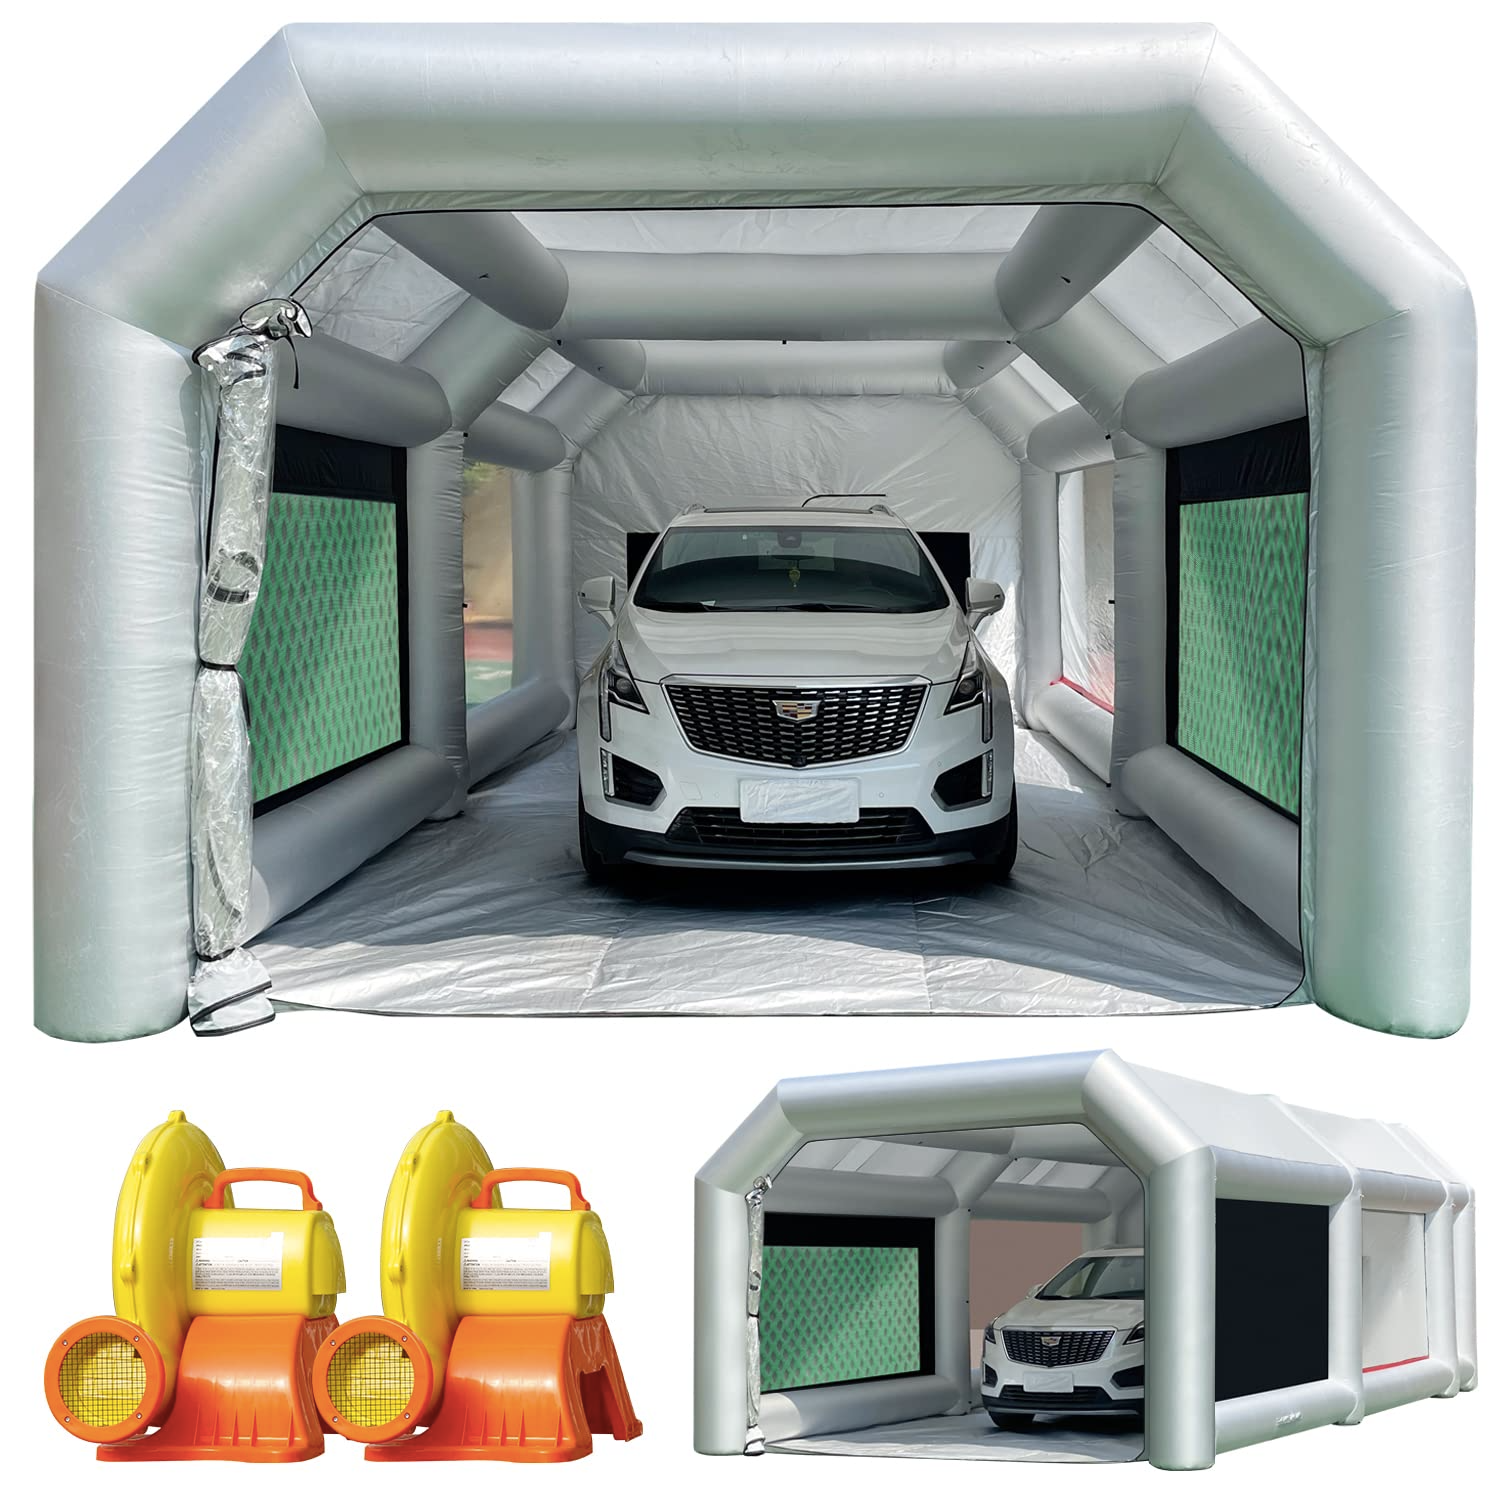 WARSUN Inflatable Paint Booth 28x15x10Ft with Dual-Layer & Oversized Air Filters Portable Paint Booth with 950W+750W Blowers Inflatable Spray Booth